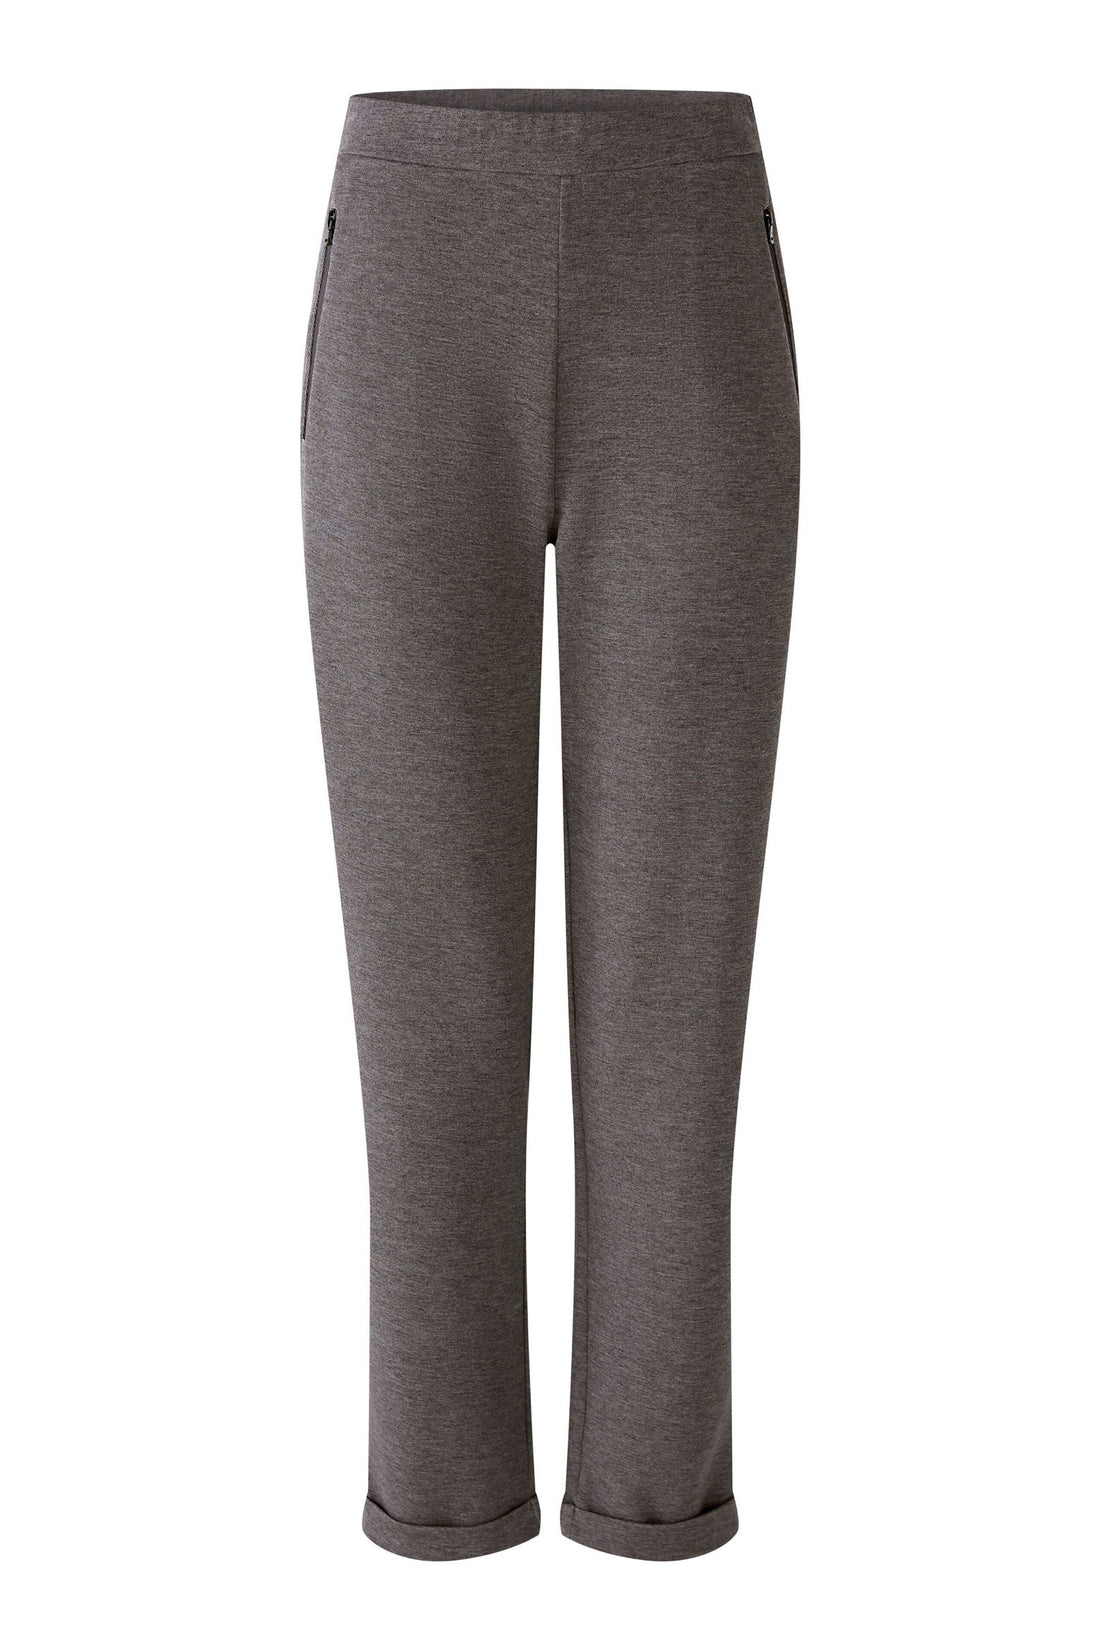 Jogger Style Trousers Made From Comfortable Jersey Quality_79867_9559_01